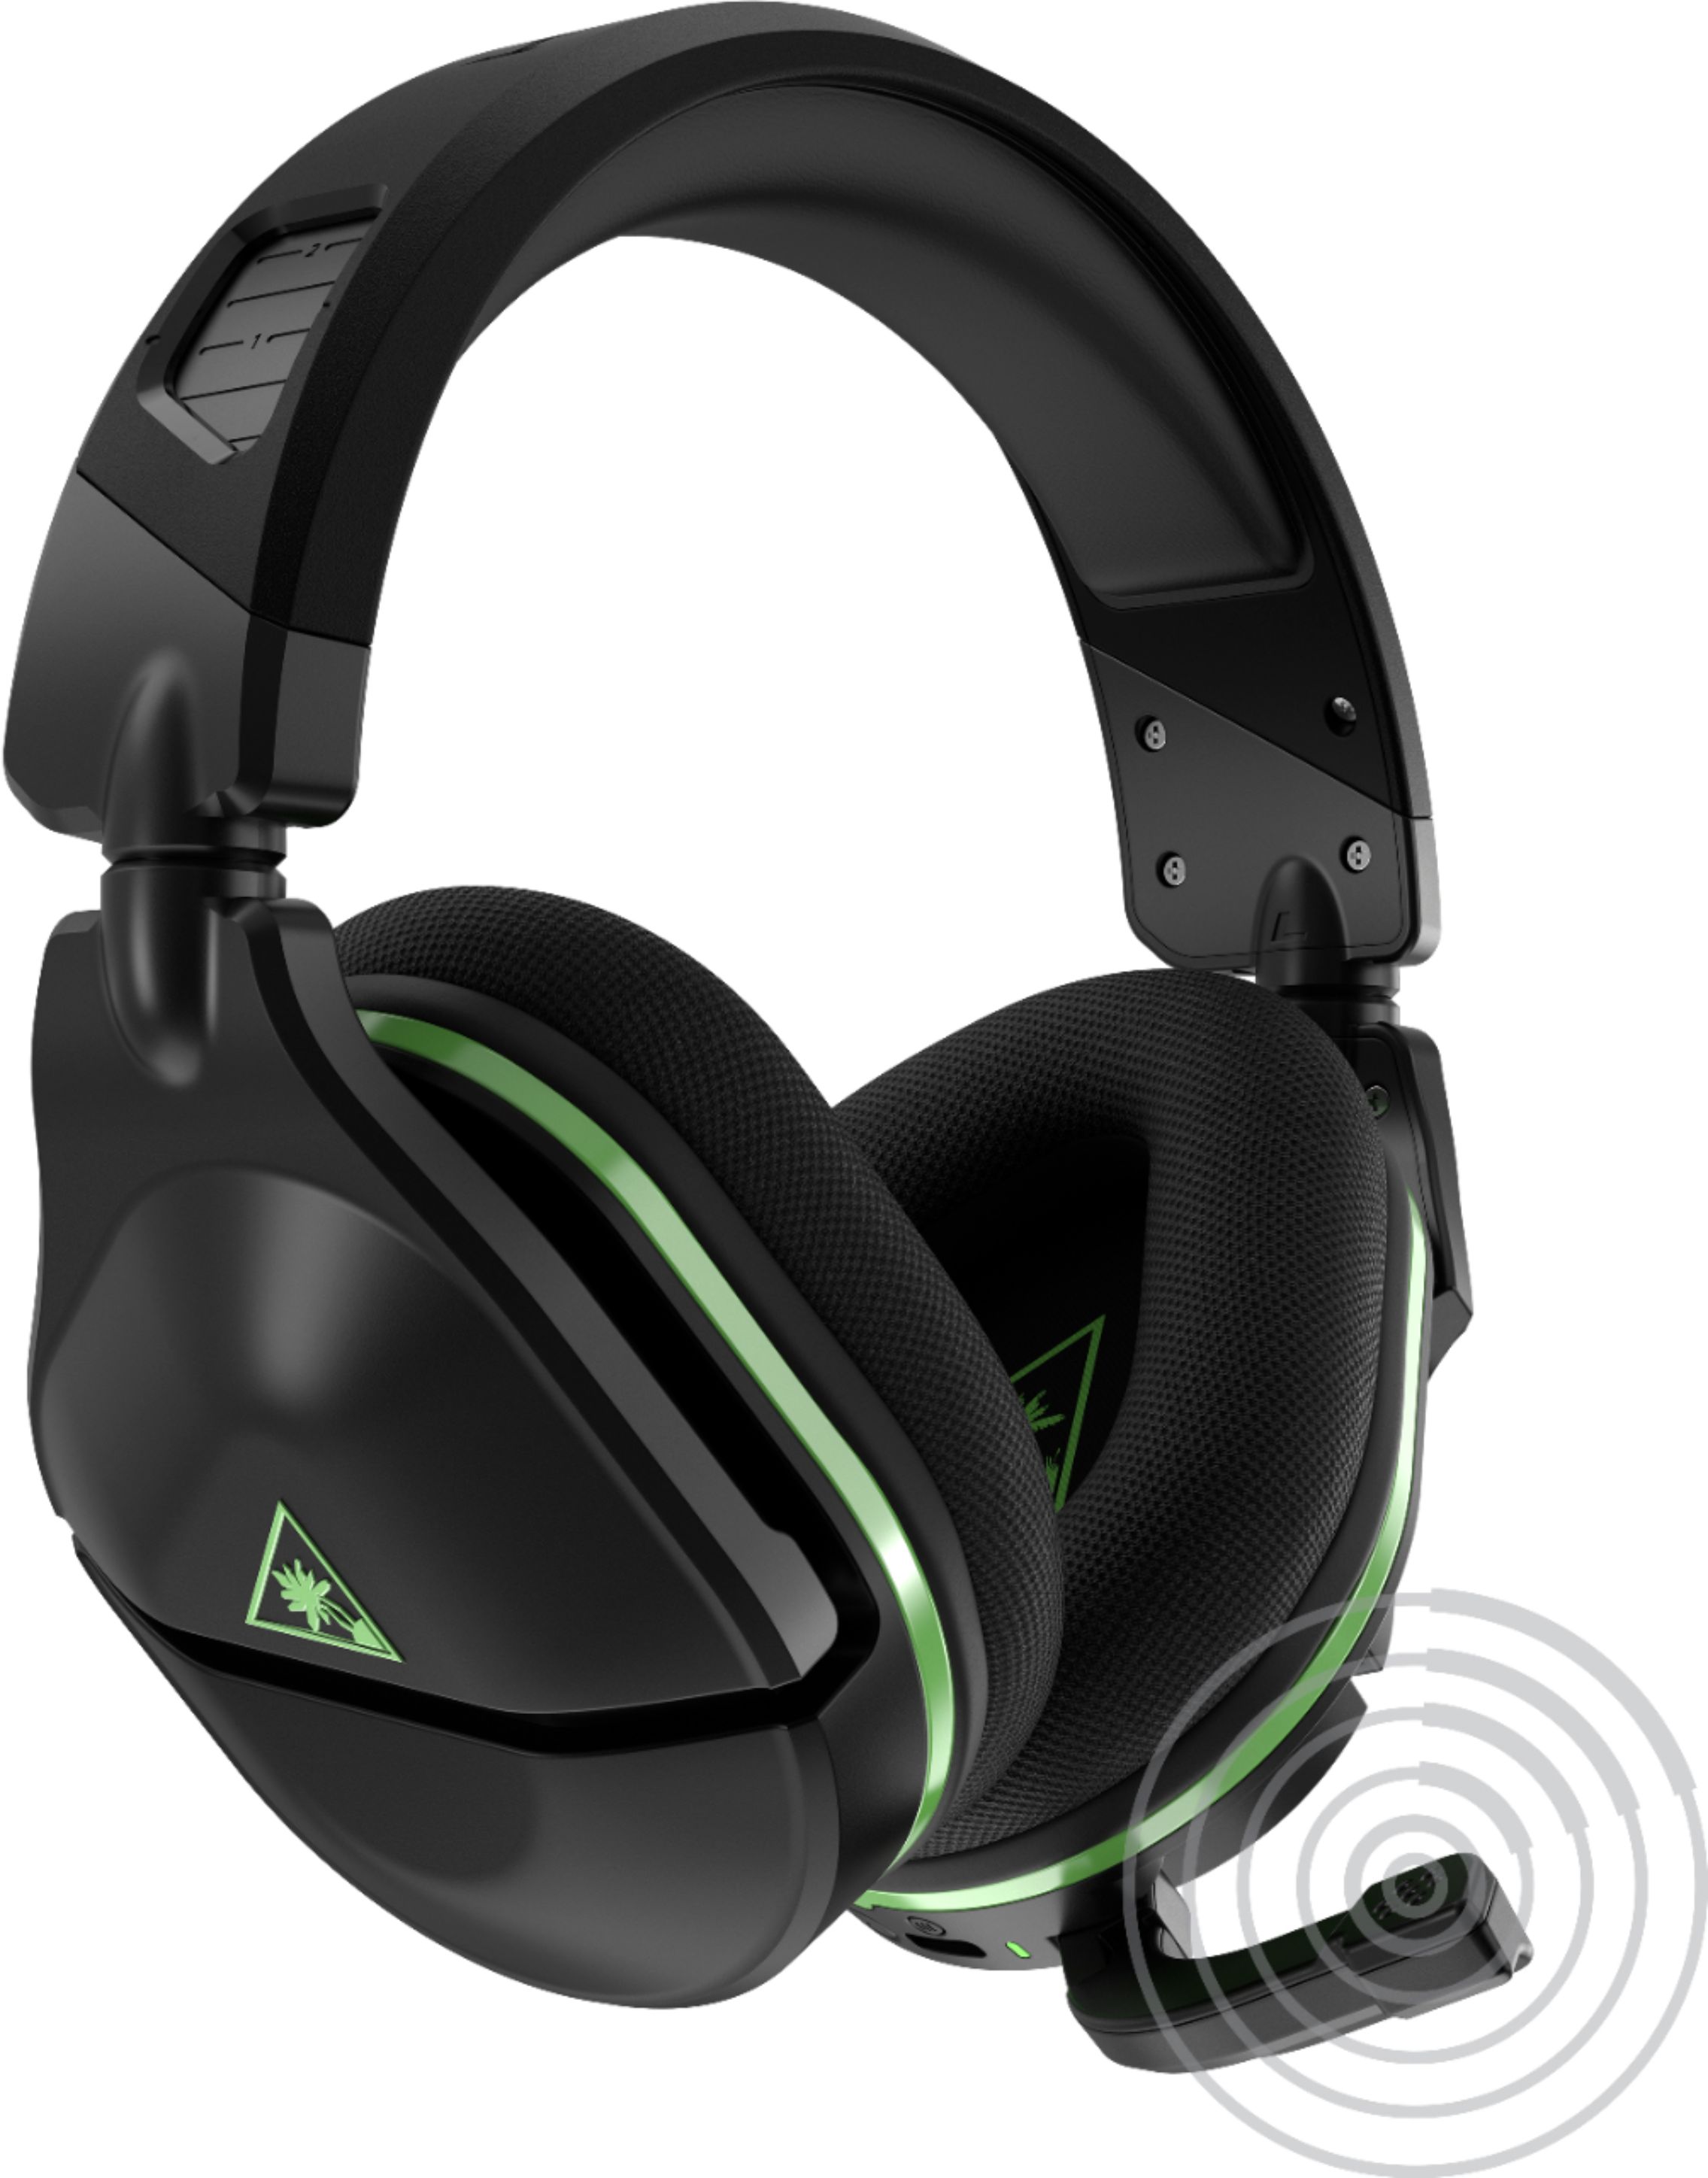 turtle beach stealth 600 wireless gaming headset for xbox one